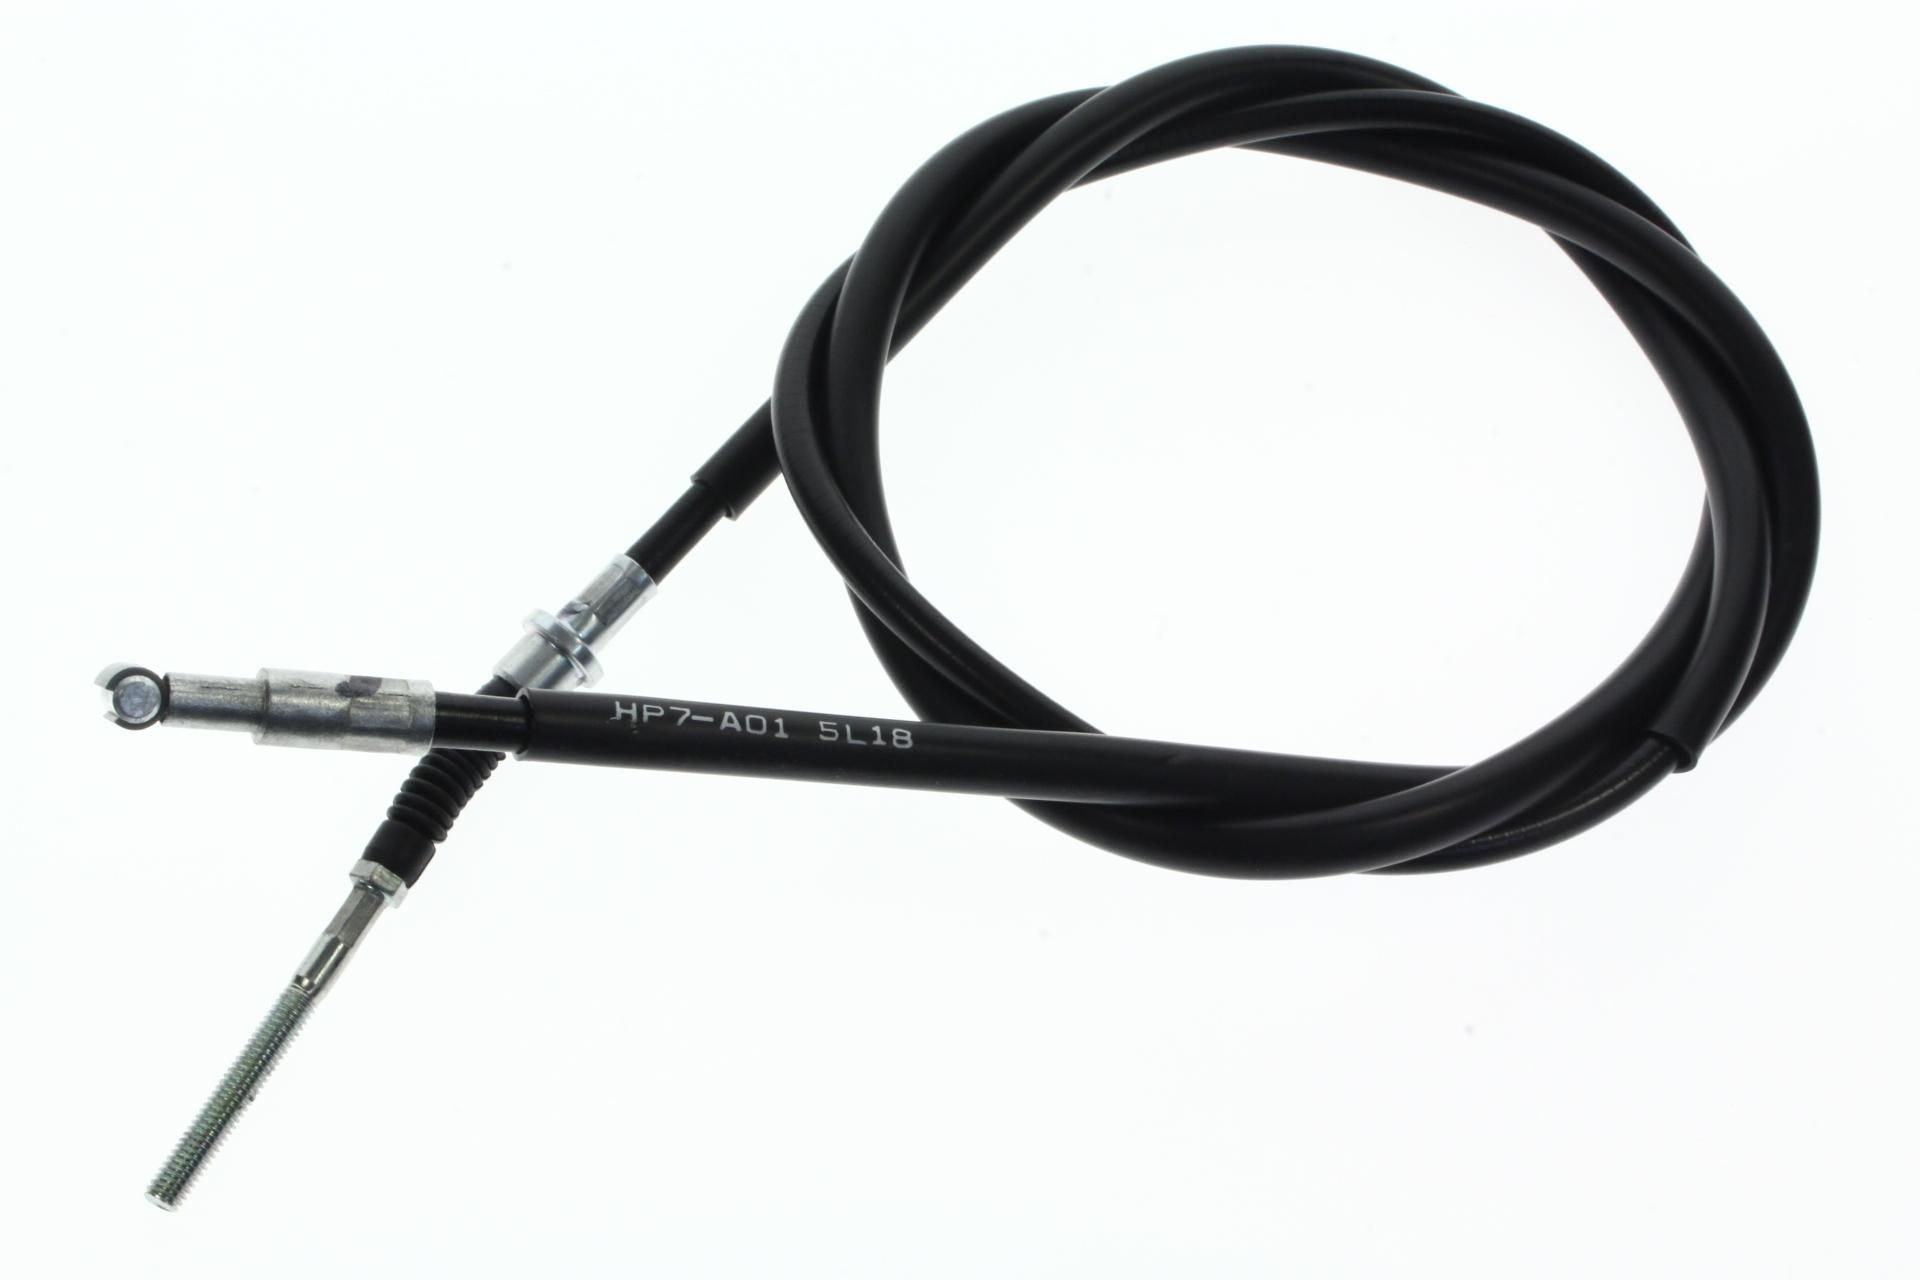 43460-HP7-A01 BRAKE CABLE